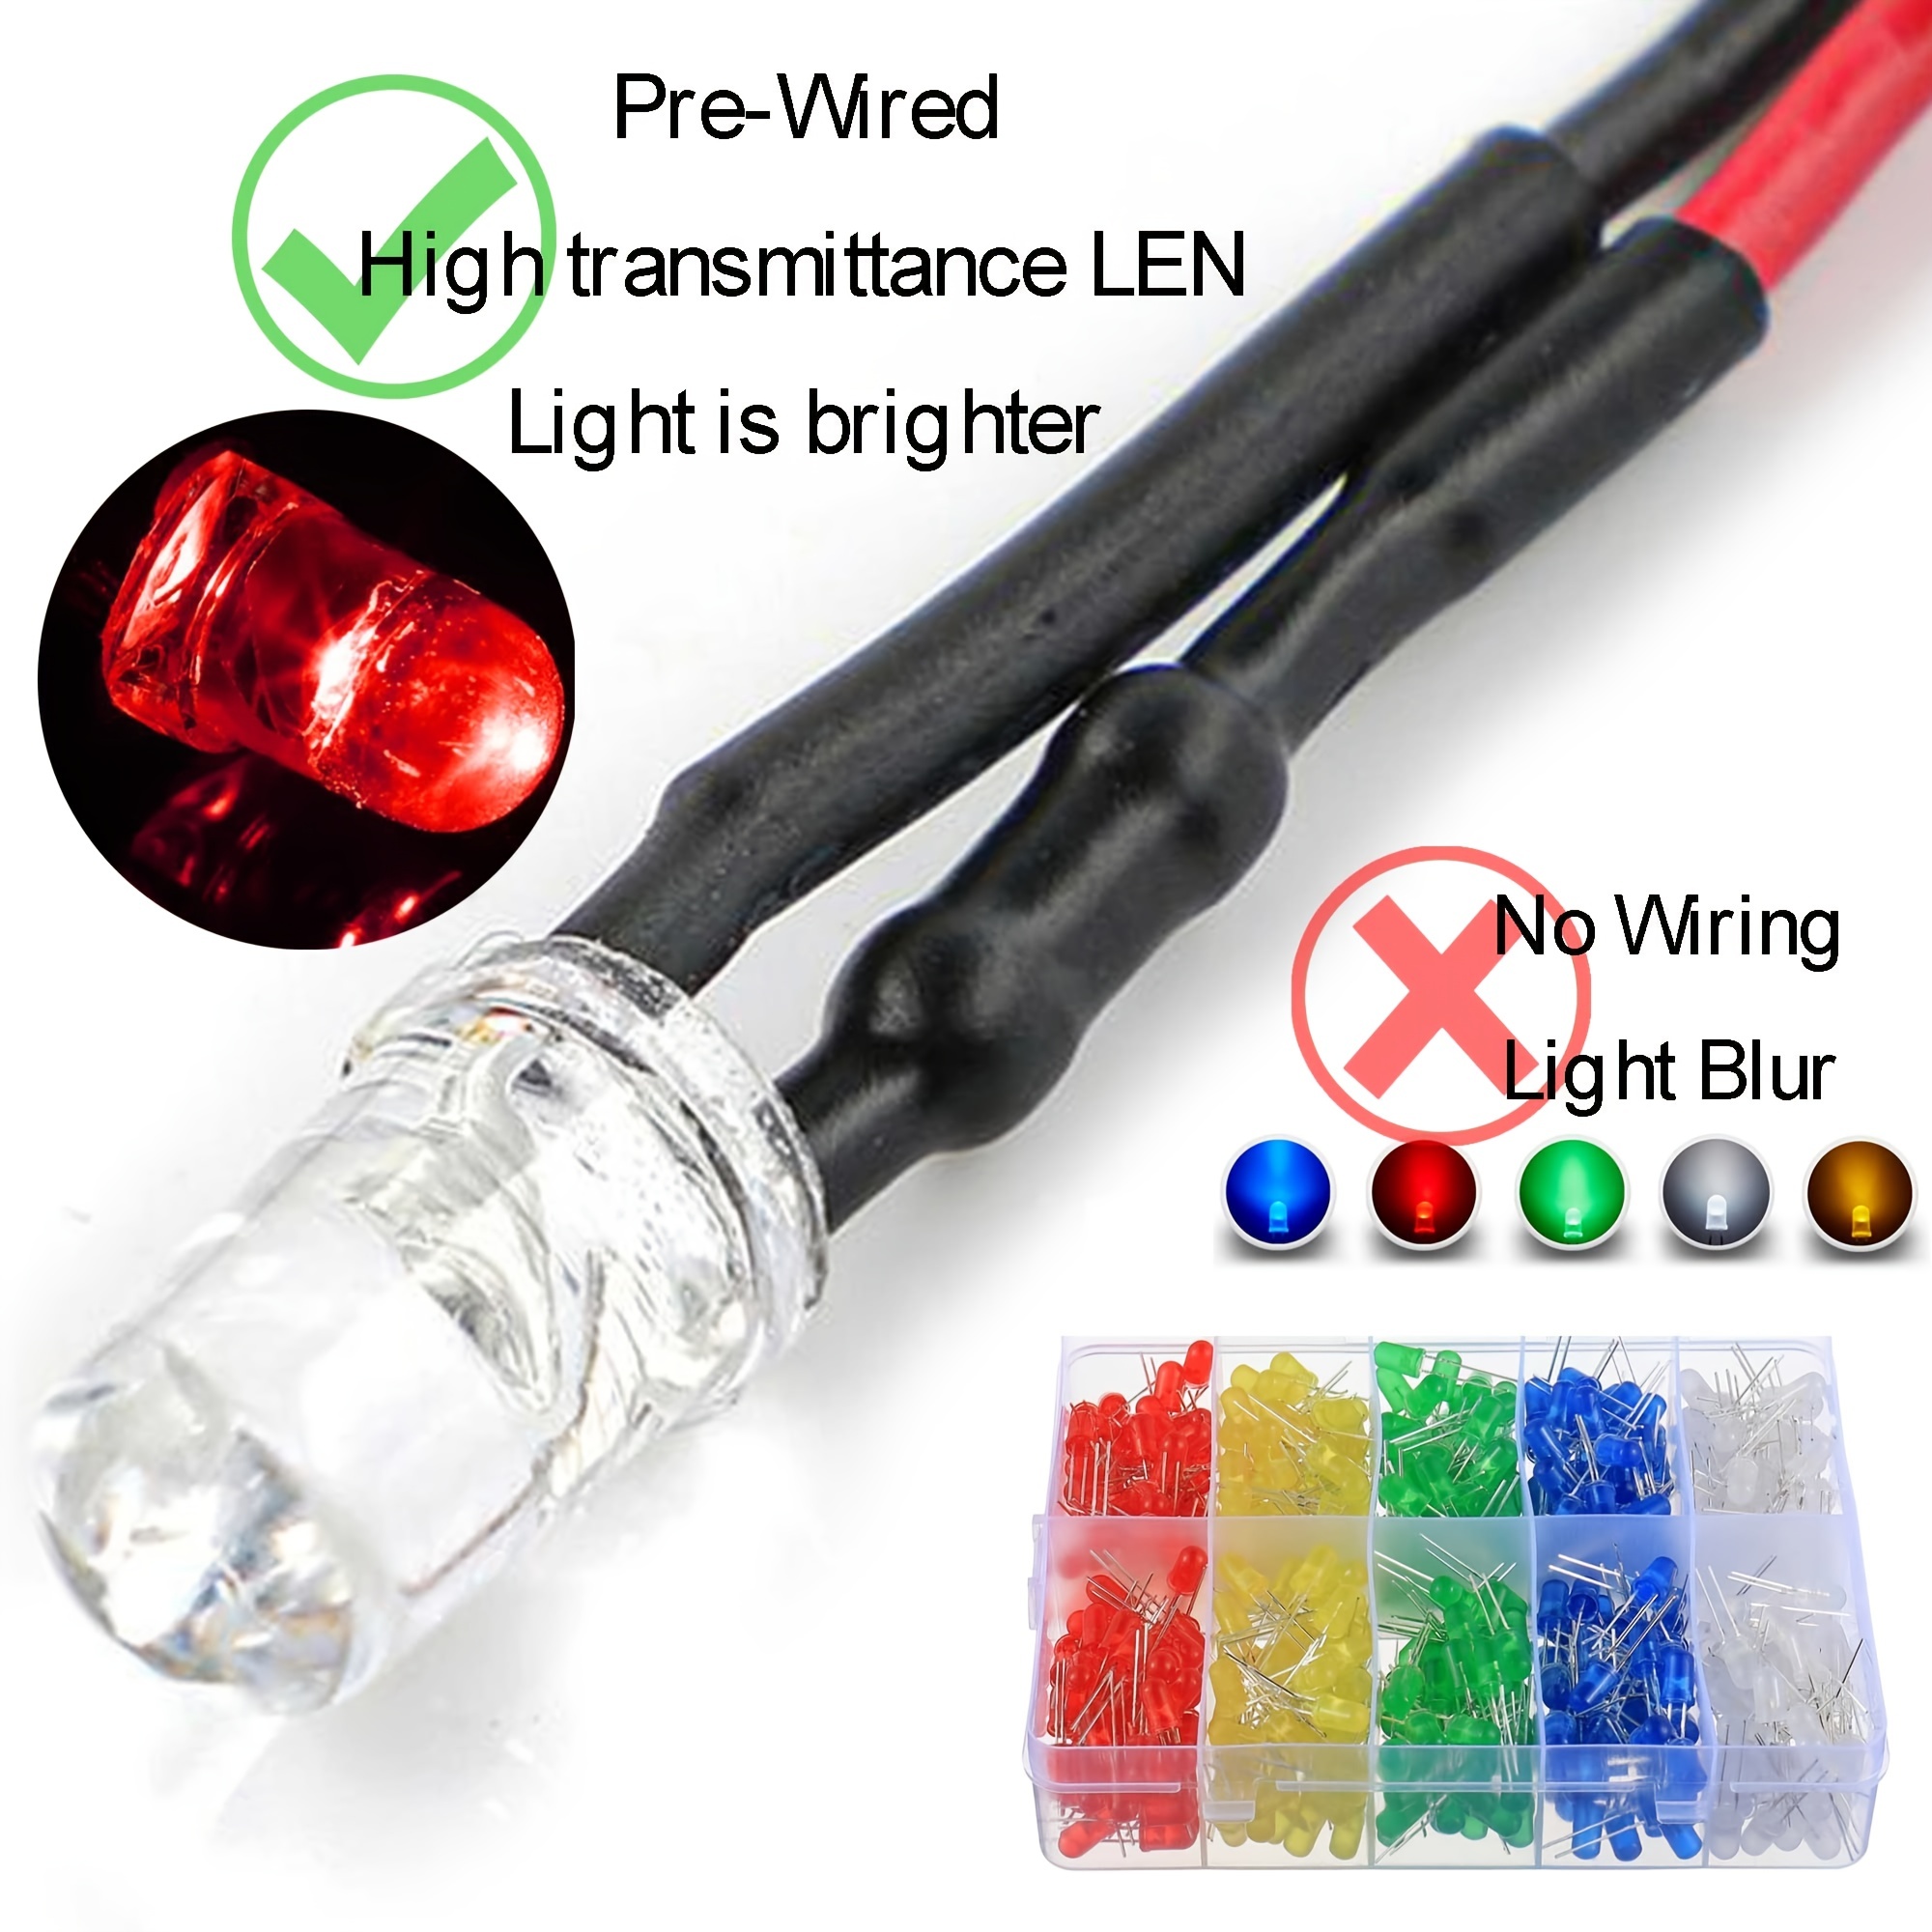 Cheap 12 Volt 3mm 5mm 10mm Pre Wired Led Light Emitting Diodes